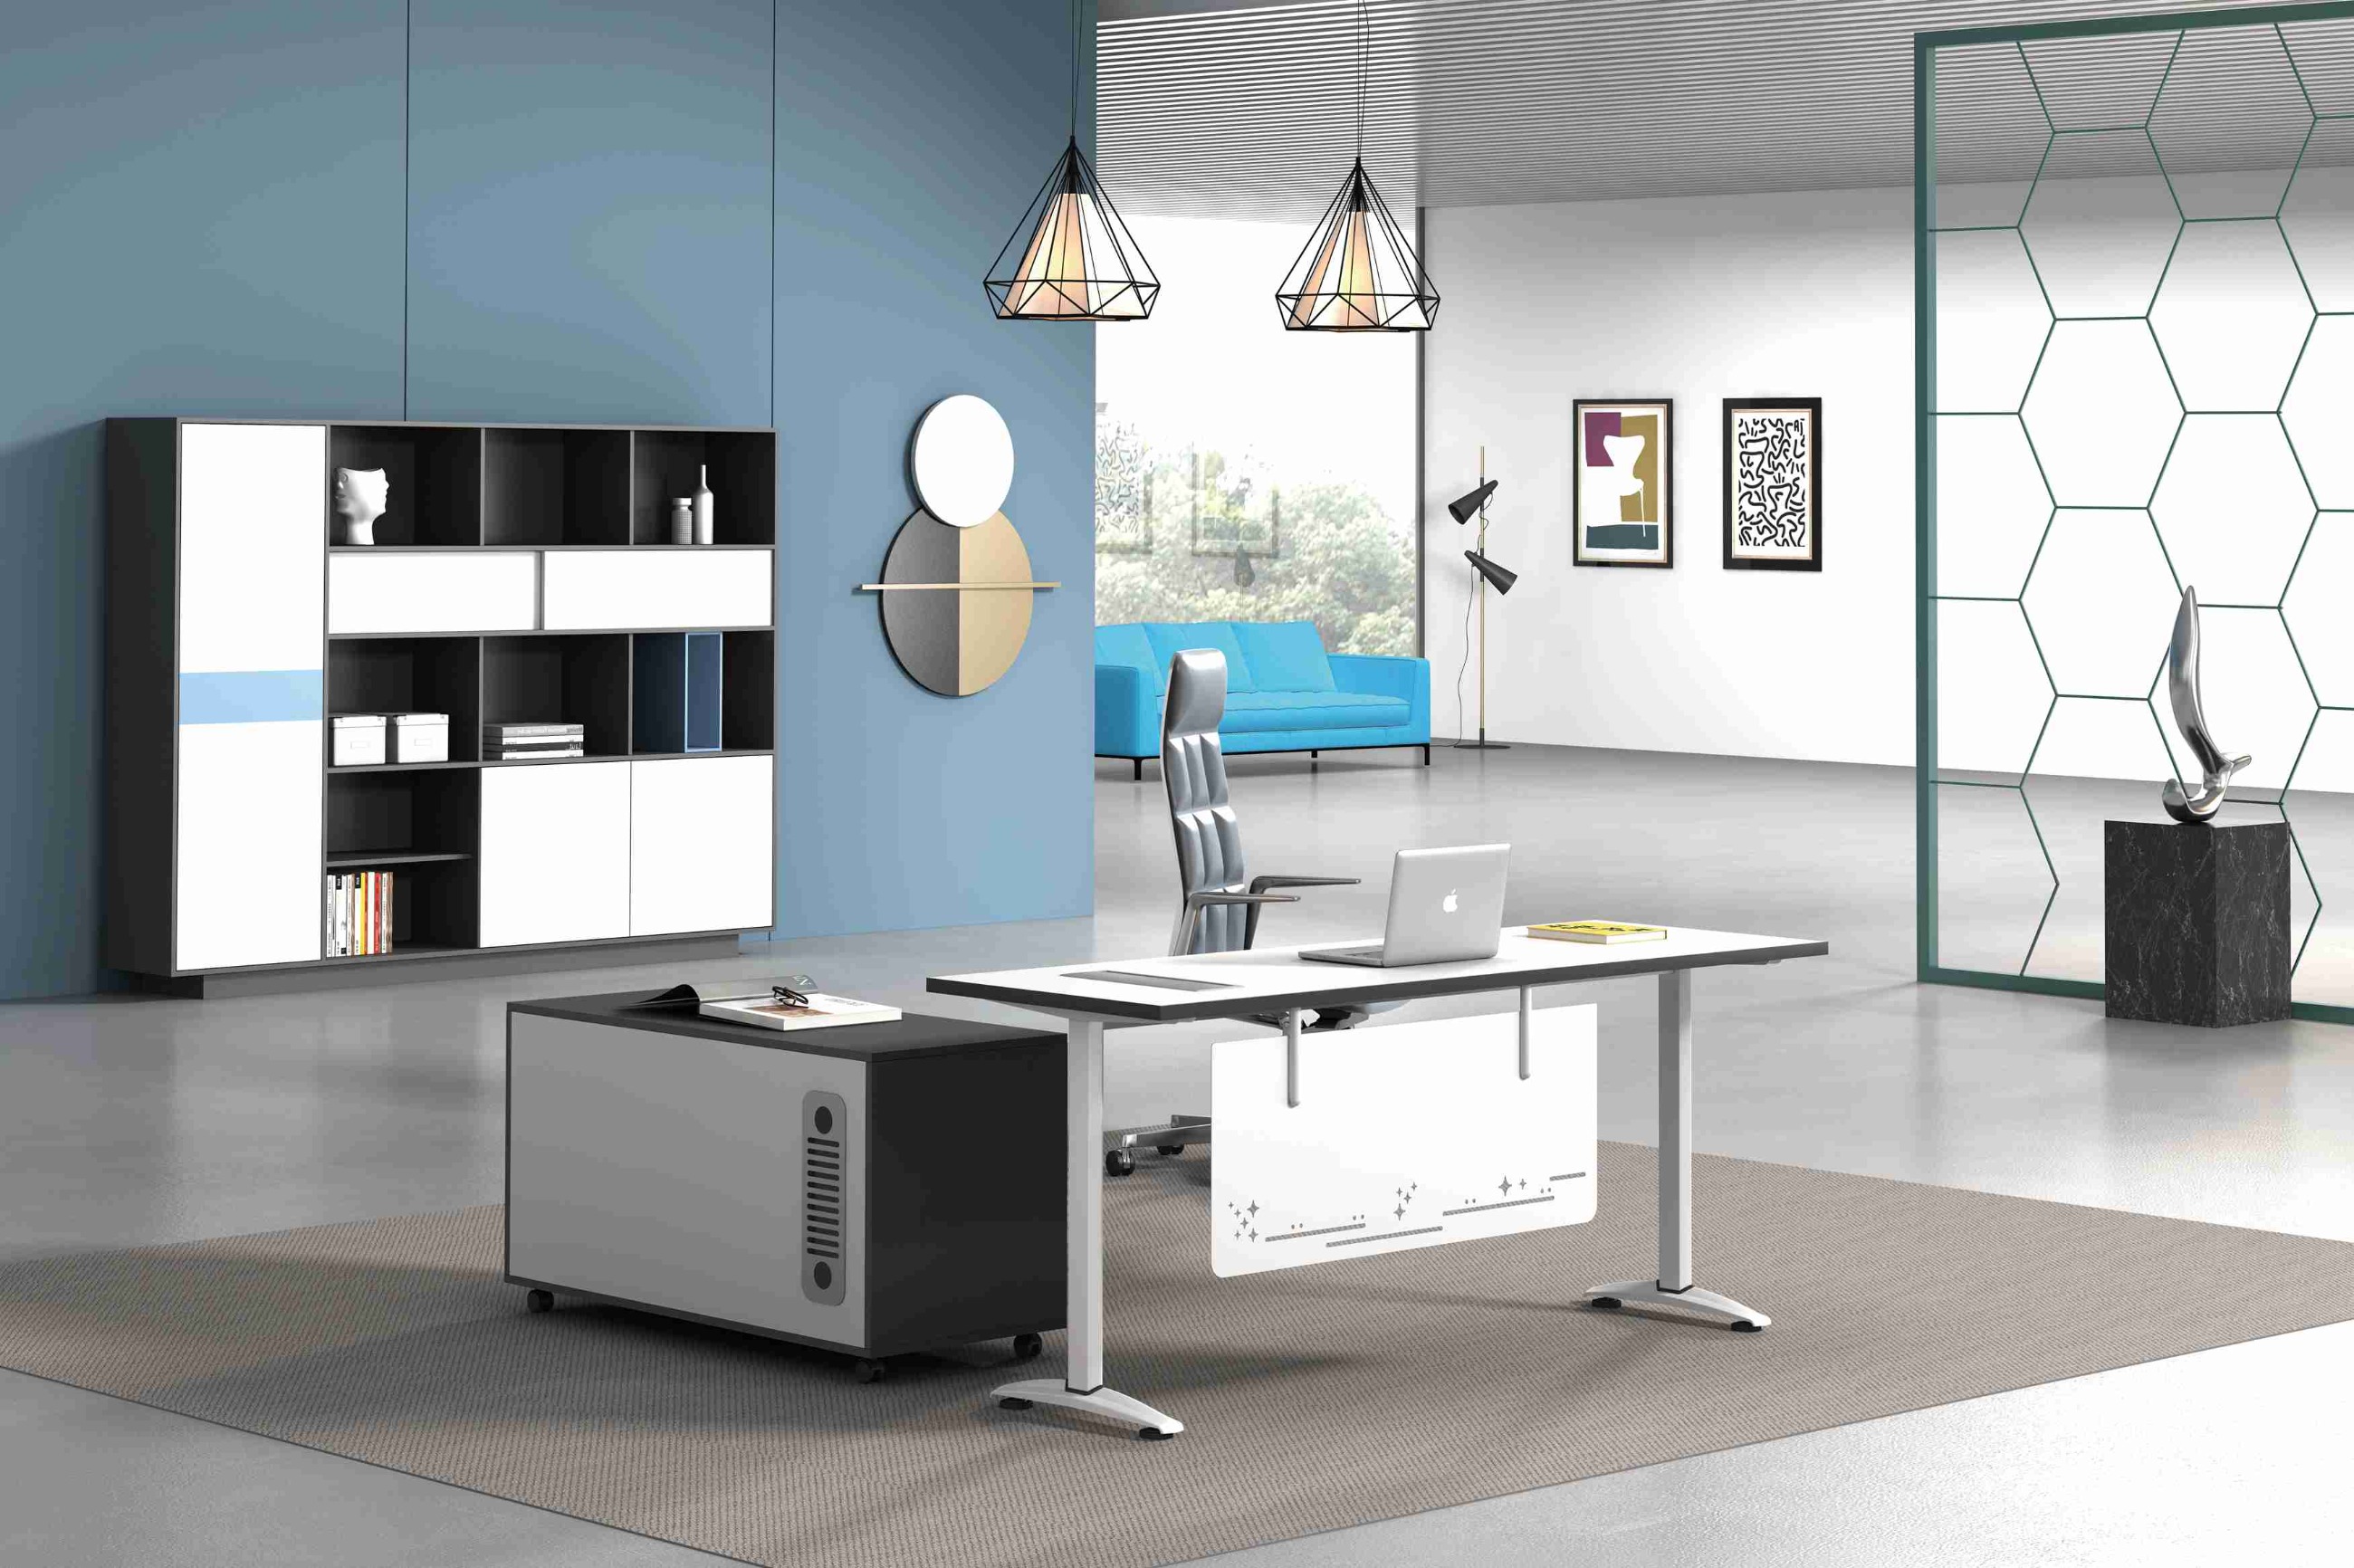 Choose BESTSTEEL,make your office space more relax